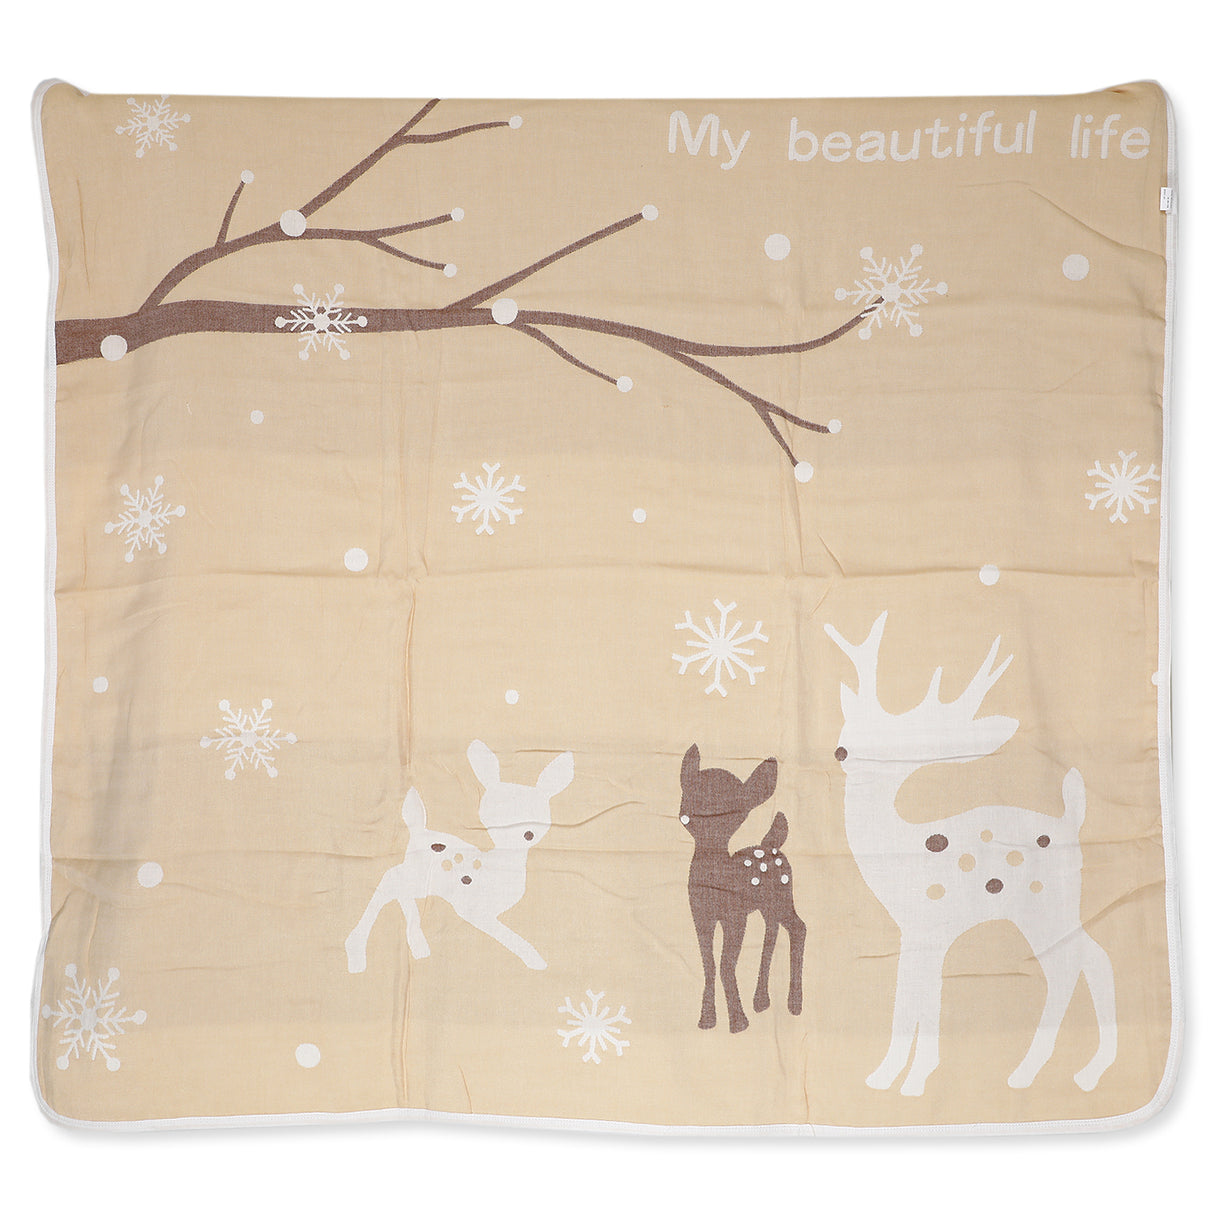 Adorable Wrapped In Love Theme Blanket